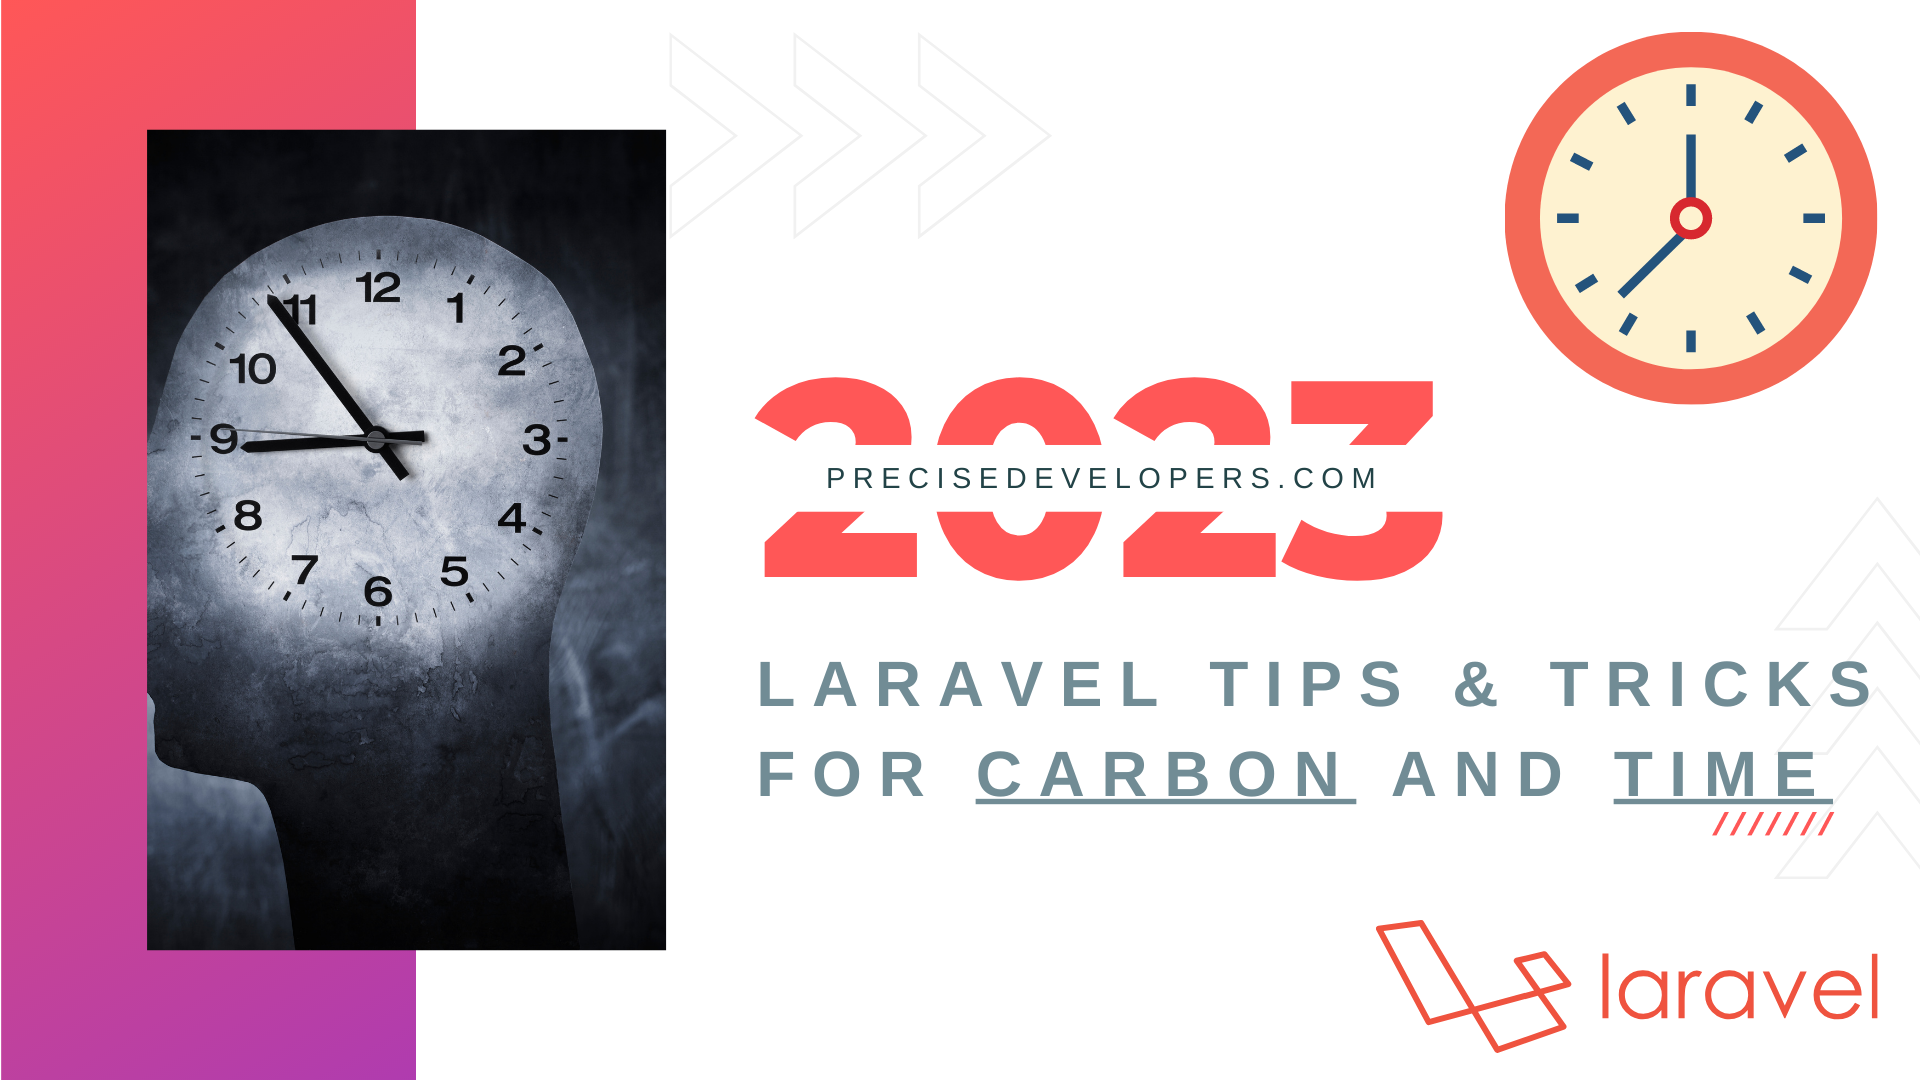 Laravel Tips & Tricks for Carbon and Time